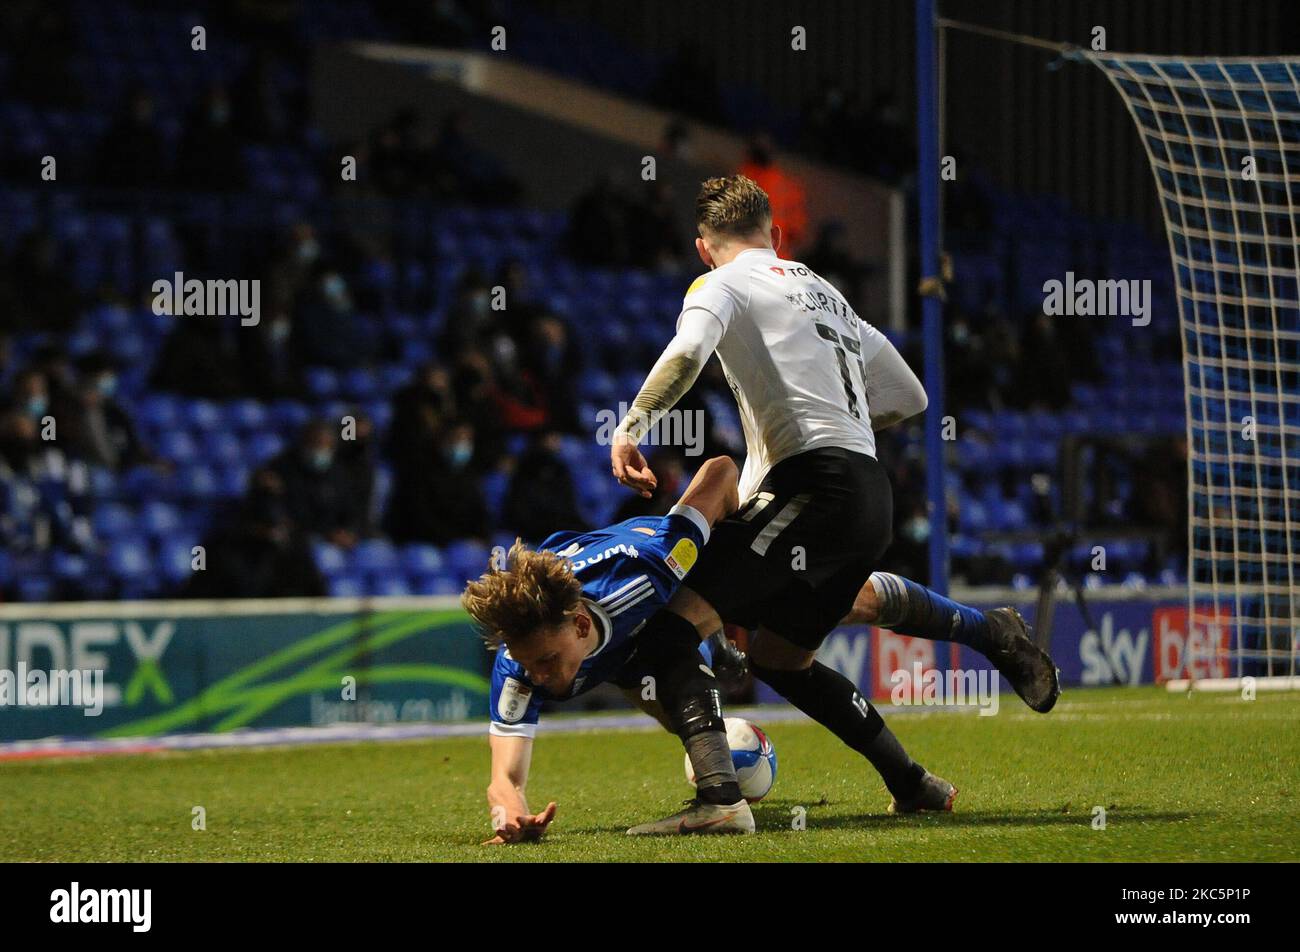 Portsmouths Ronan Curtis fouls Ipswichs Luke Woolfenden during the Sky Bet League 1 match between Ipswich Town and Portsmouth at Portman Road, Ipswich on Saturday 12th December 2020. (Photo by Ben Pooley/MI News/NurPhoto) Stock Photo